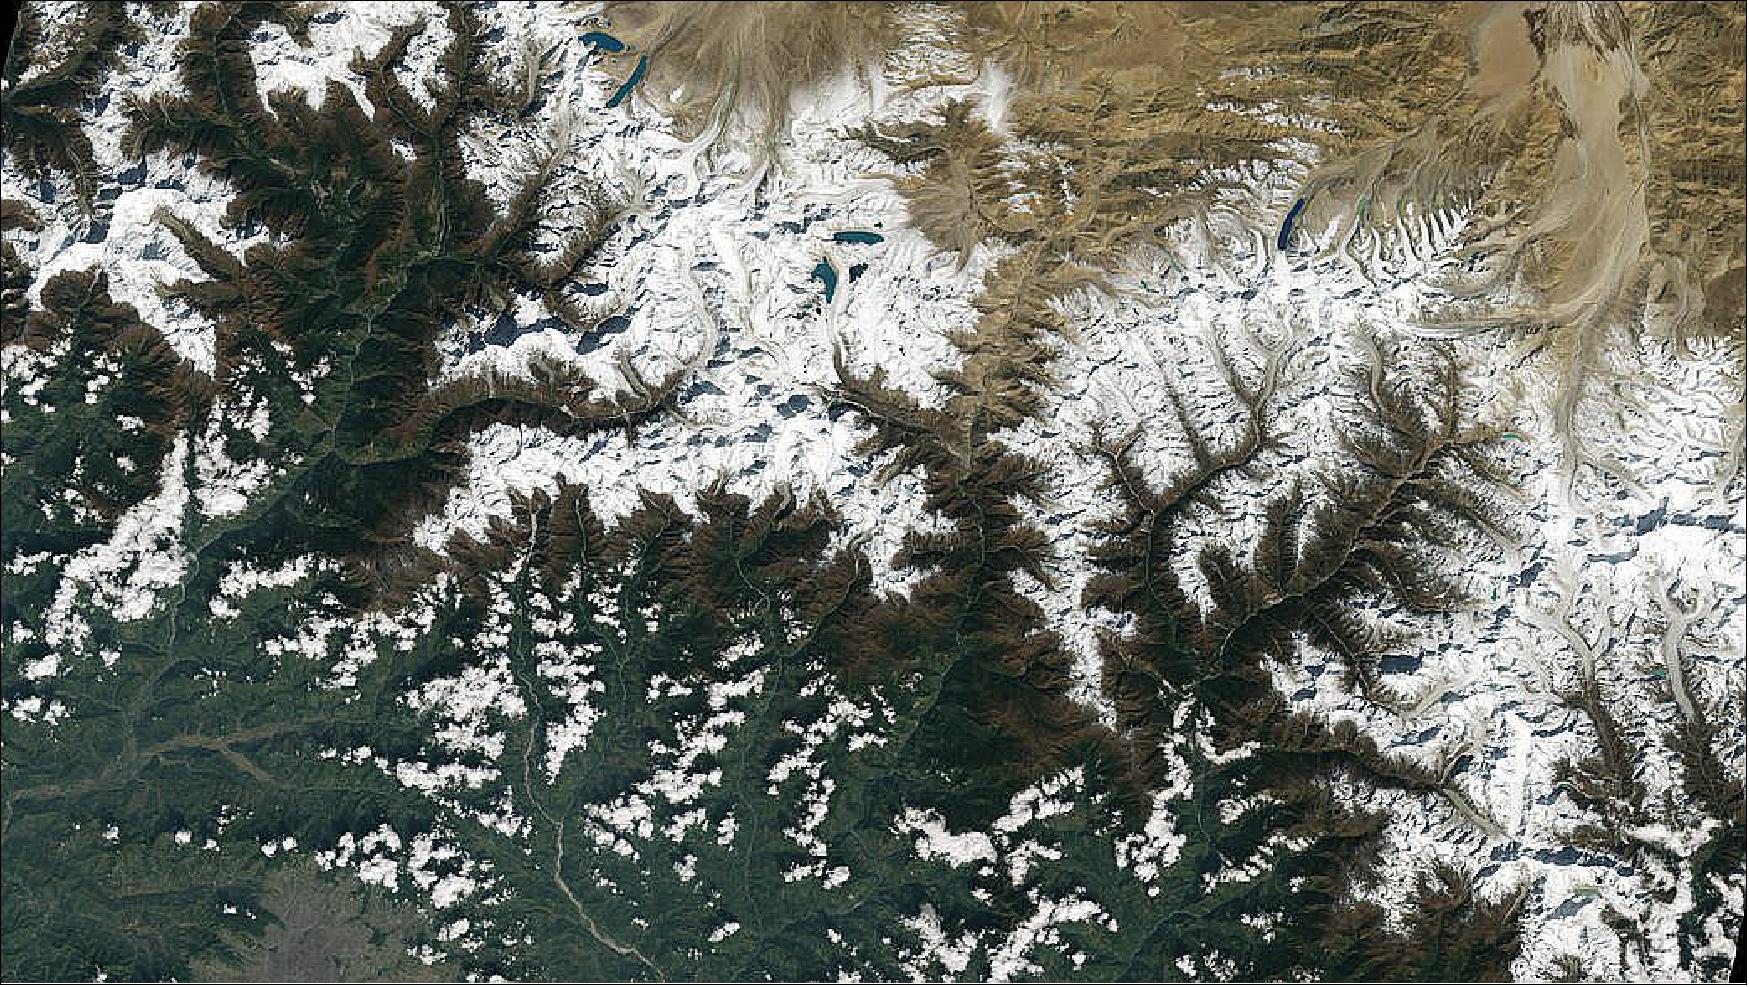 Figure 49: The city of Kathmandu, Nepal, seen at the bottom left of this Landsat-9 image, lies in a valley south of the Himalayan Mountains between Nepal and China. Glaciers, and the lakes formed by glacial meltwater, are visible in the top middle of this image. In High Mountain Asia, many communities rely on meltwater from glaciers – and Landsat can help track how those glaciers are changing in a warming climate. Previous studies with Landsat have documented shrinkage of Himalayan glaciers, as well as changing lake levels the adjacent Tibetan plateau. From Oct. 31, 2021, the first day of data collection for Landsat-9 (image credit:NASA/USGS, Michael Bock)